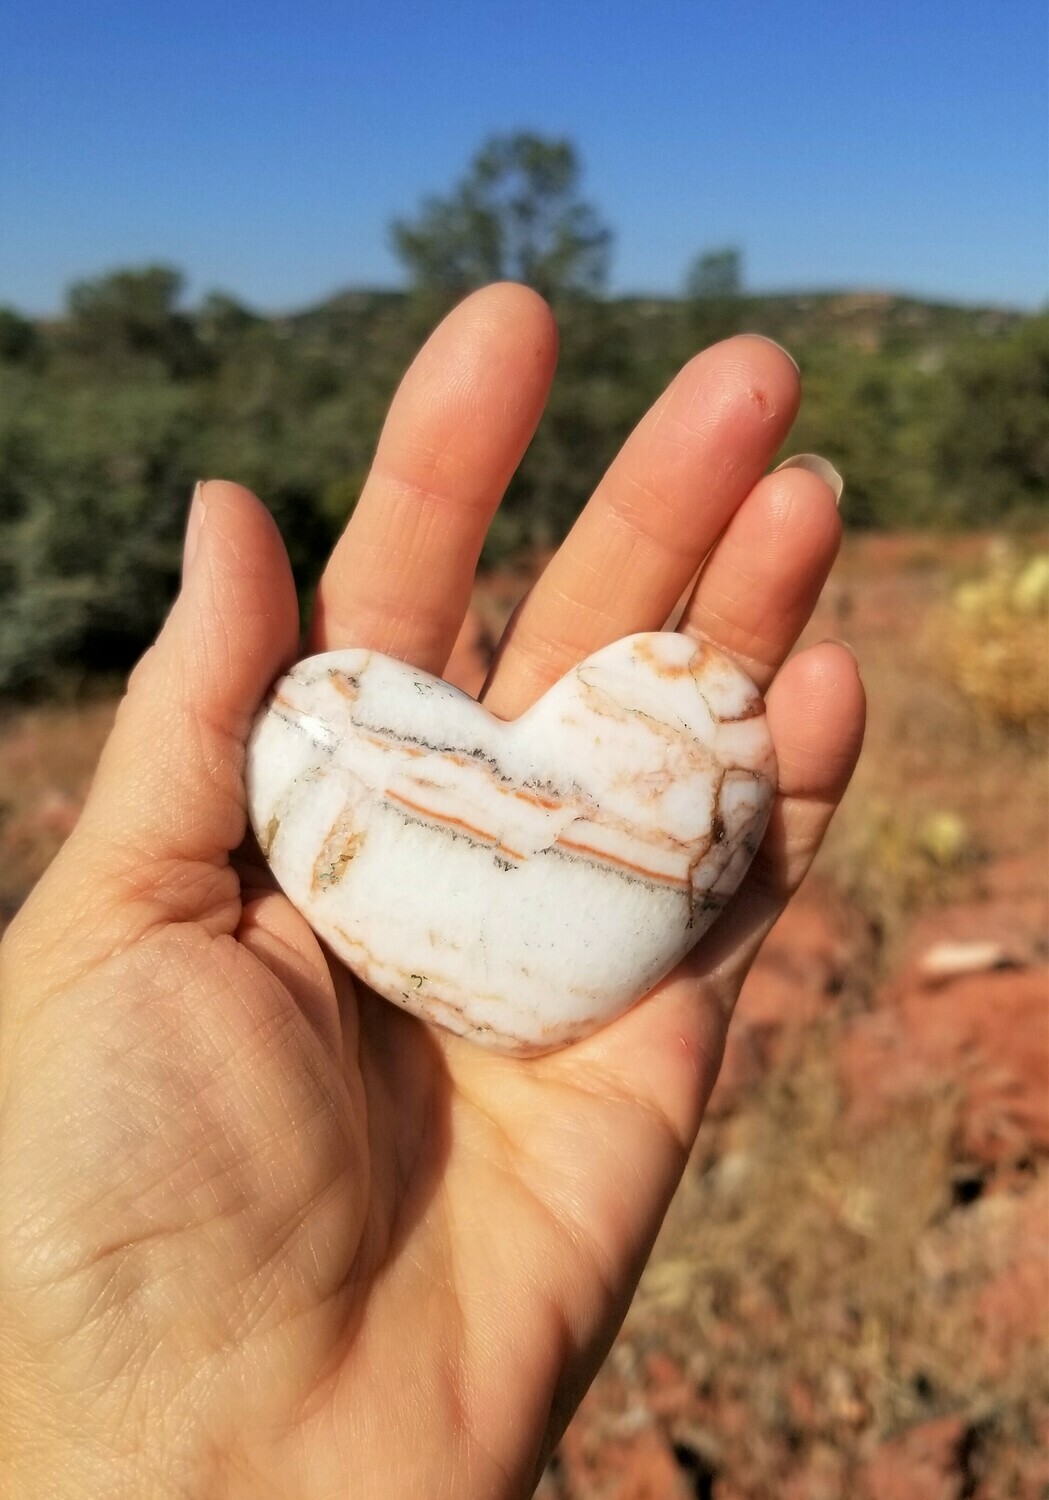 Brave Heart/Sedona White Light Ascension Crystal/Holding Healing Heart of Mother Earth Gaia $188/$344.00 Retreat Sale